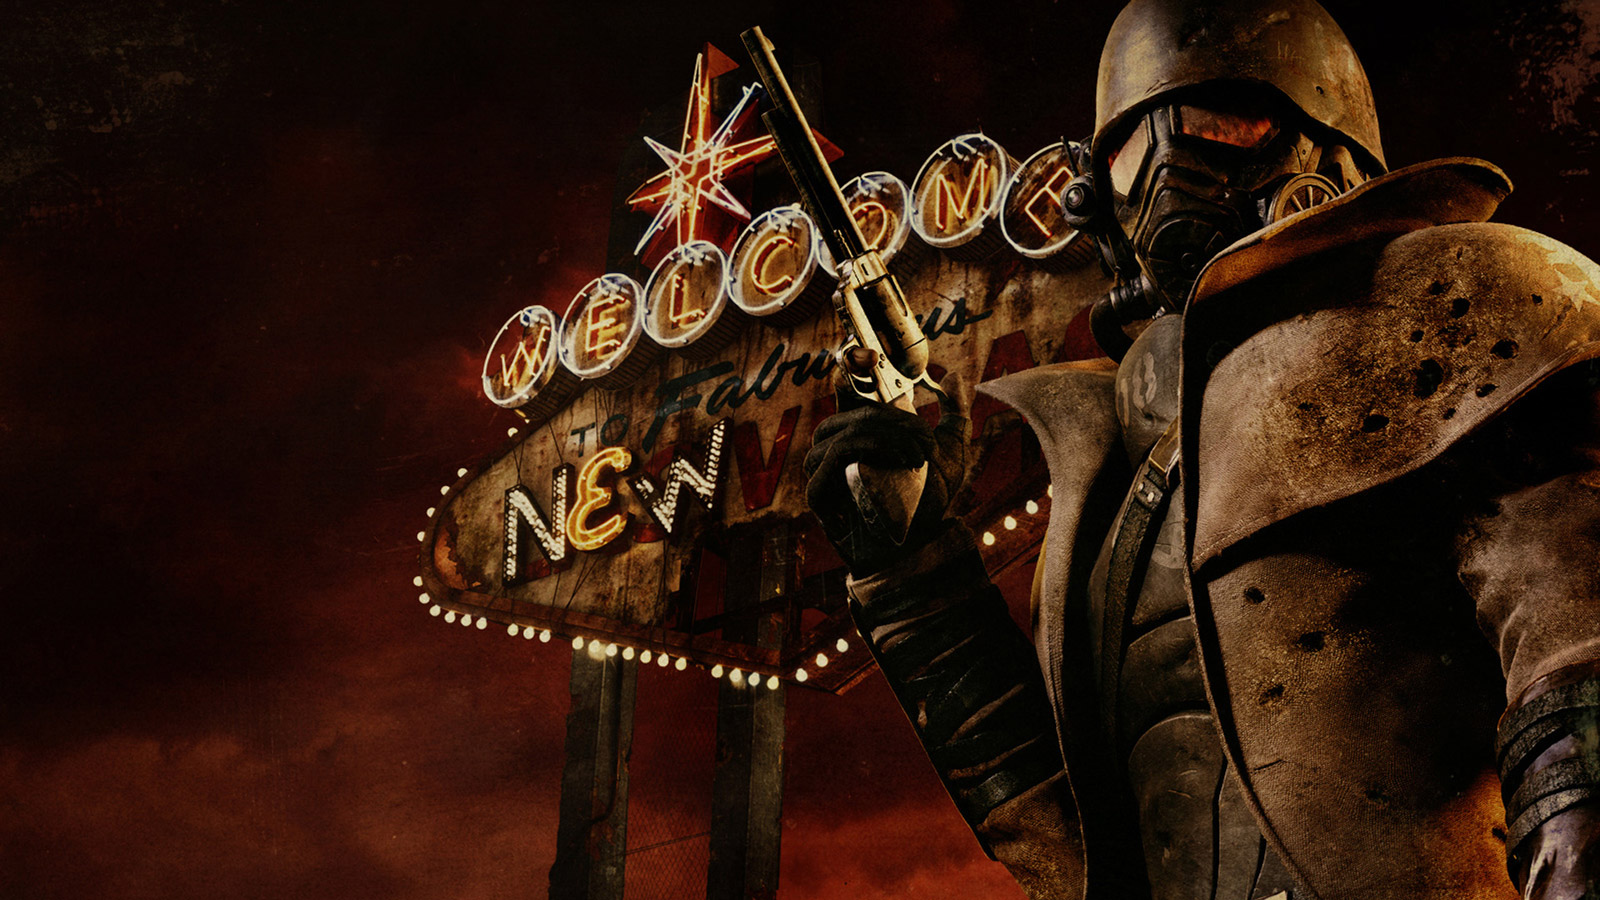 How to get idolized by NCR for Fallout: New Vegas